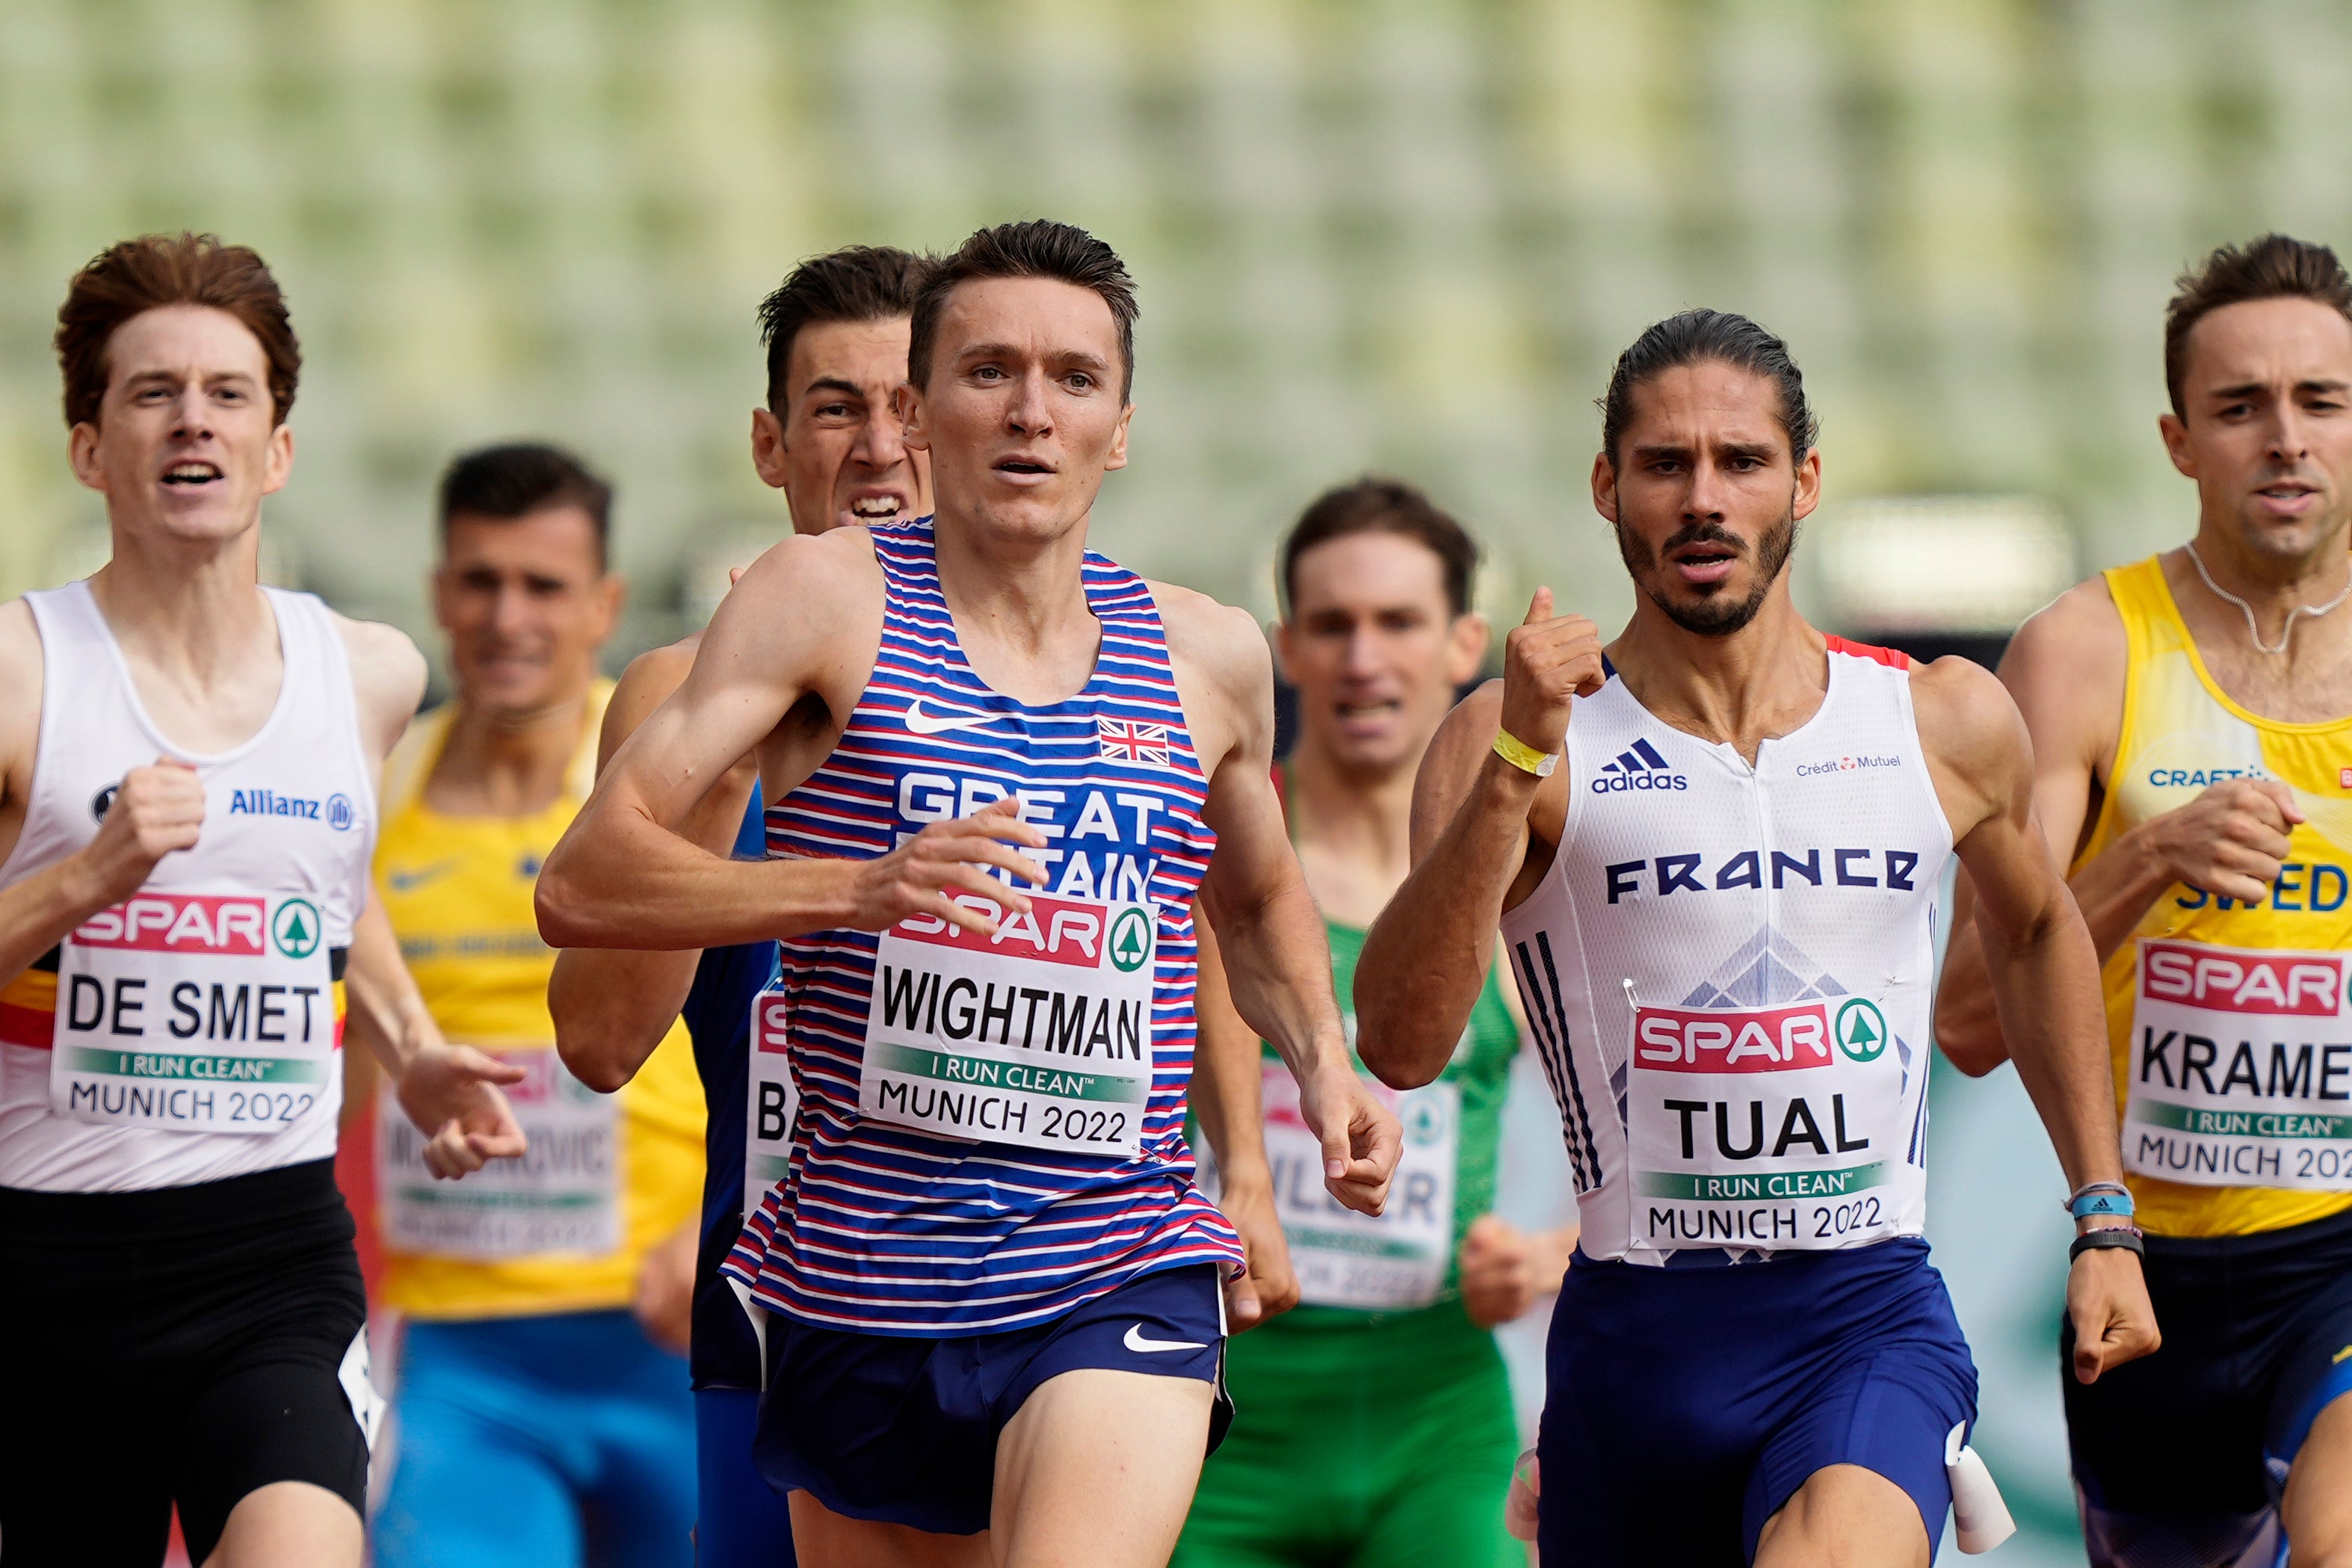 Wightman won gold over 1,500 metres in Eugene last month but is contesting the 800m in Munich